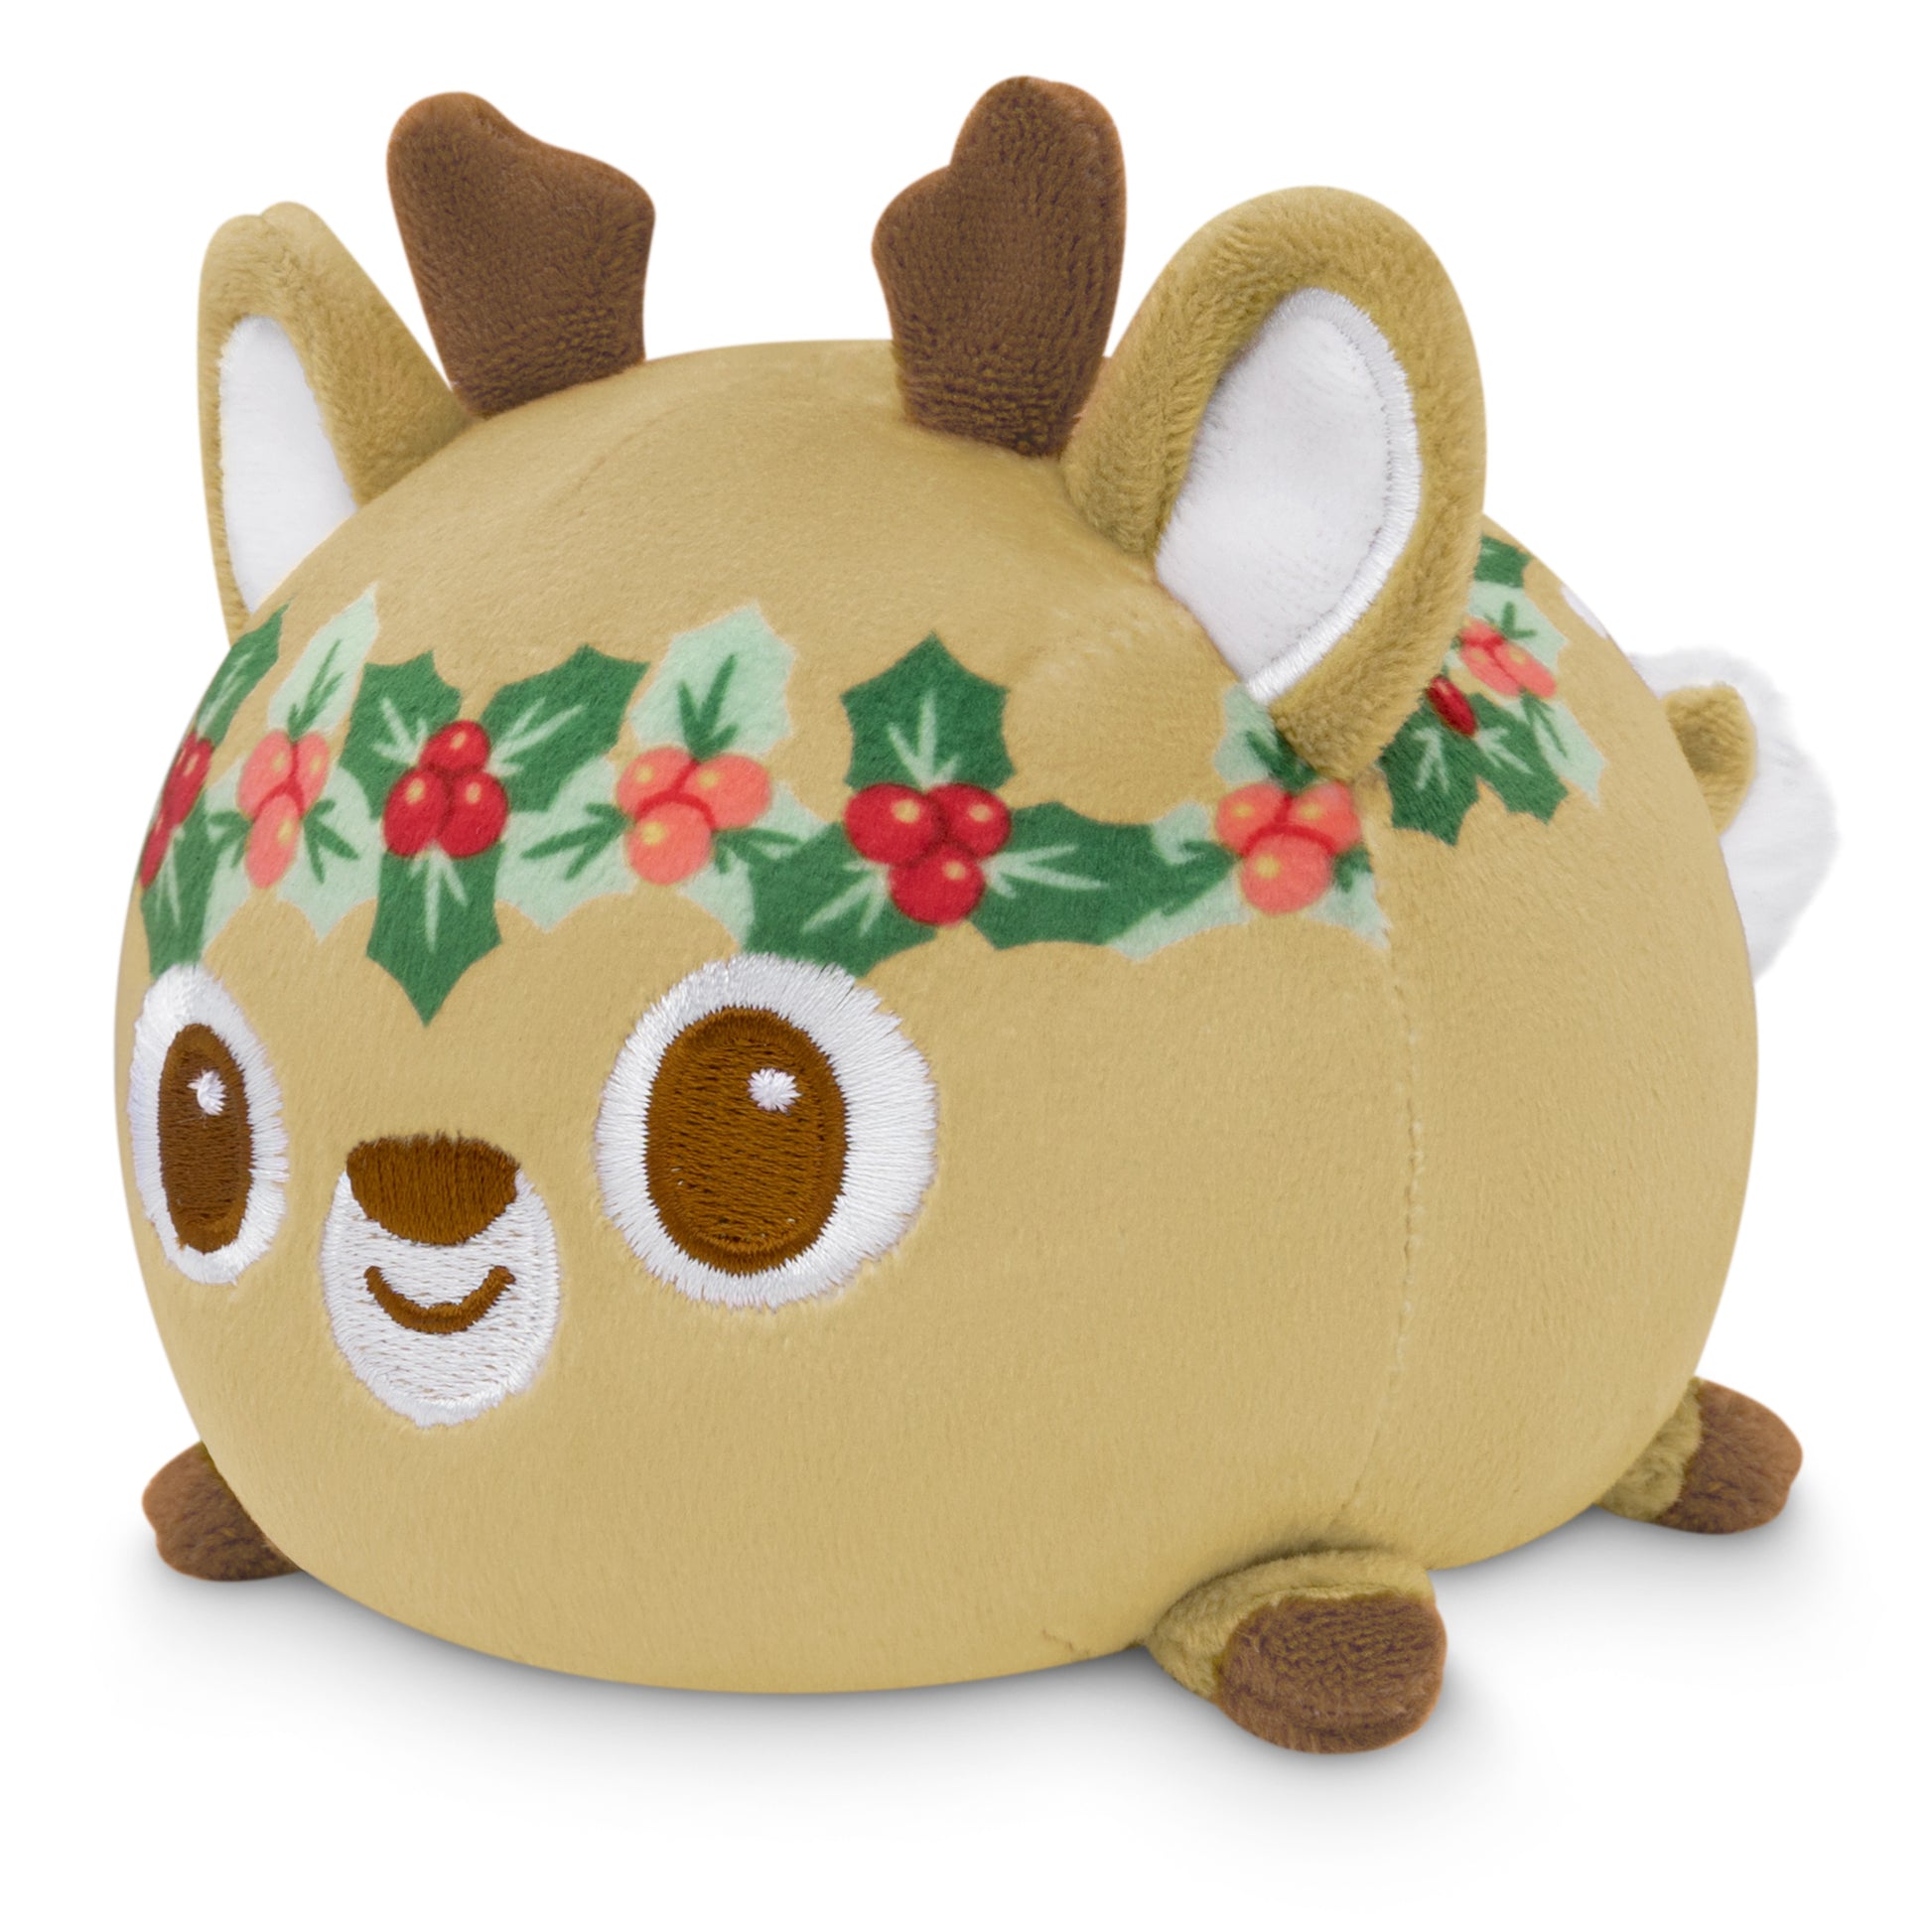 A TeeTurtle Plushiverse Holly Jolly Deer Plushie Tote Bag adorned with a holly wreath on its head, featuring a velcro storage pouch for hidden treasures.